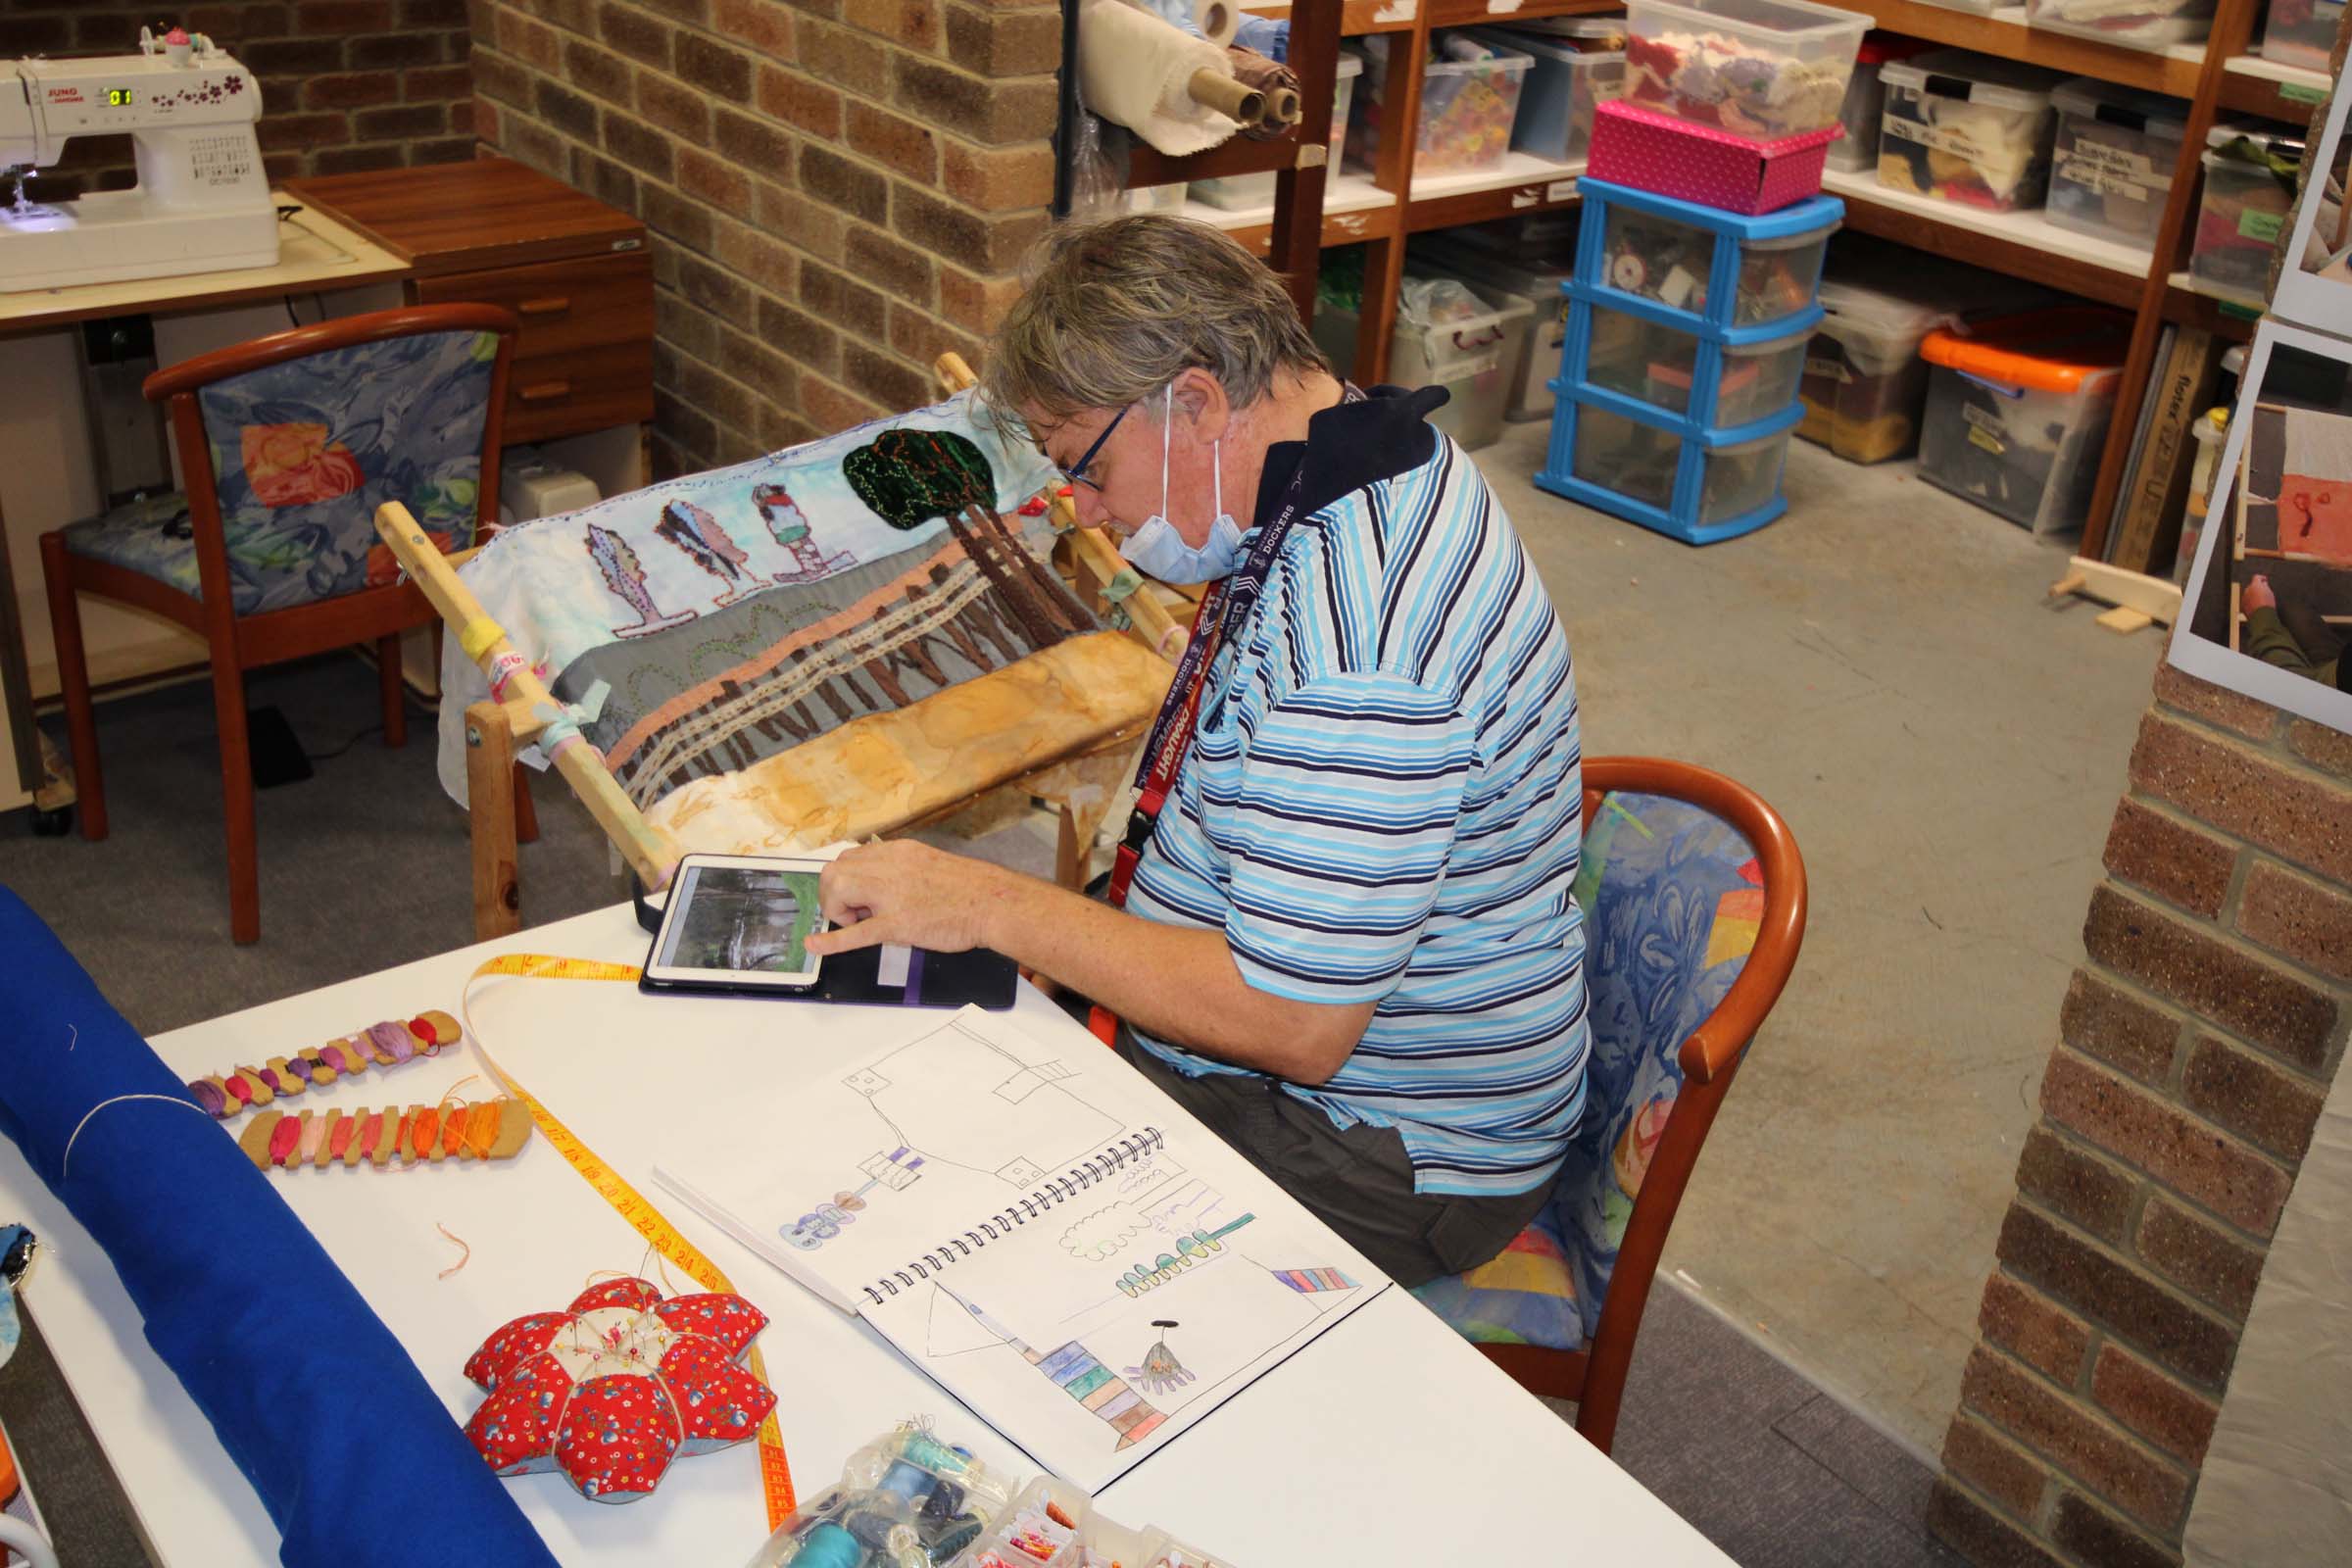 A man sits at a craft work station and works on his adaptive frame.